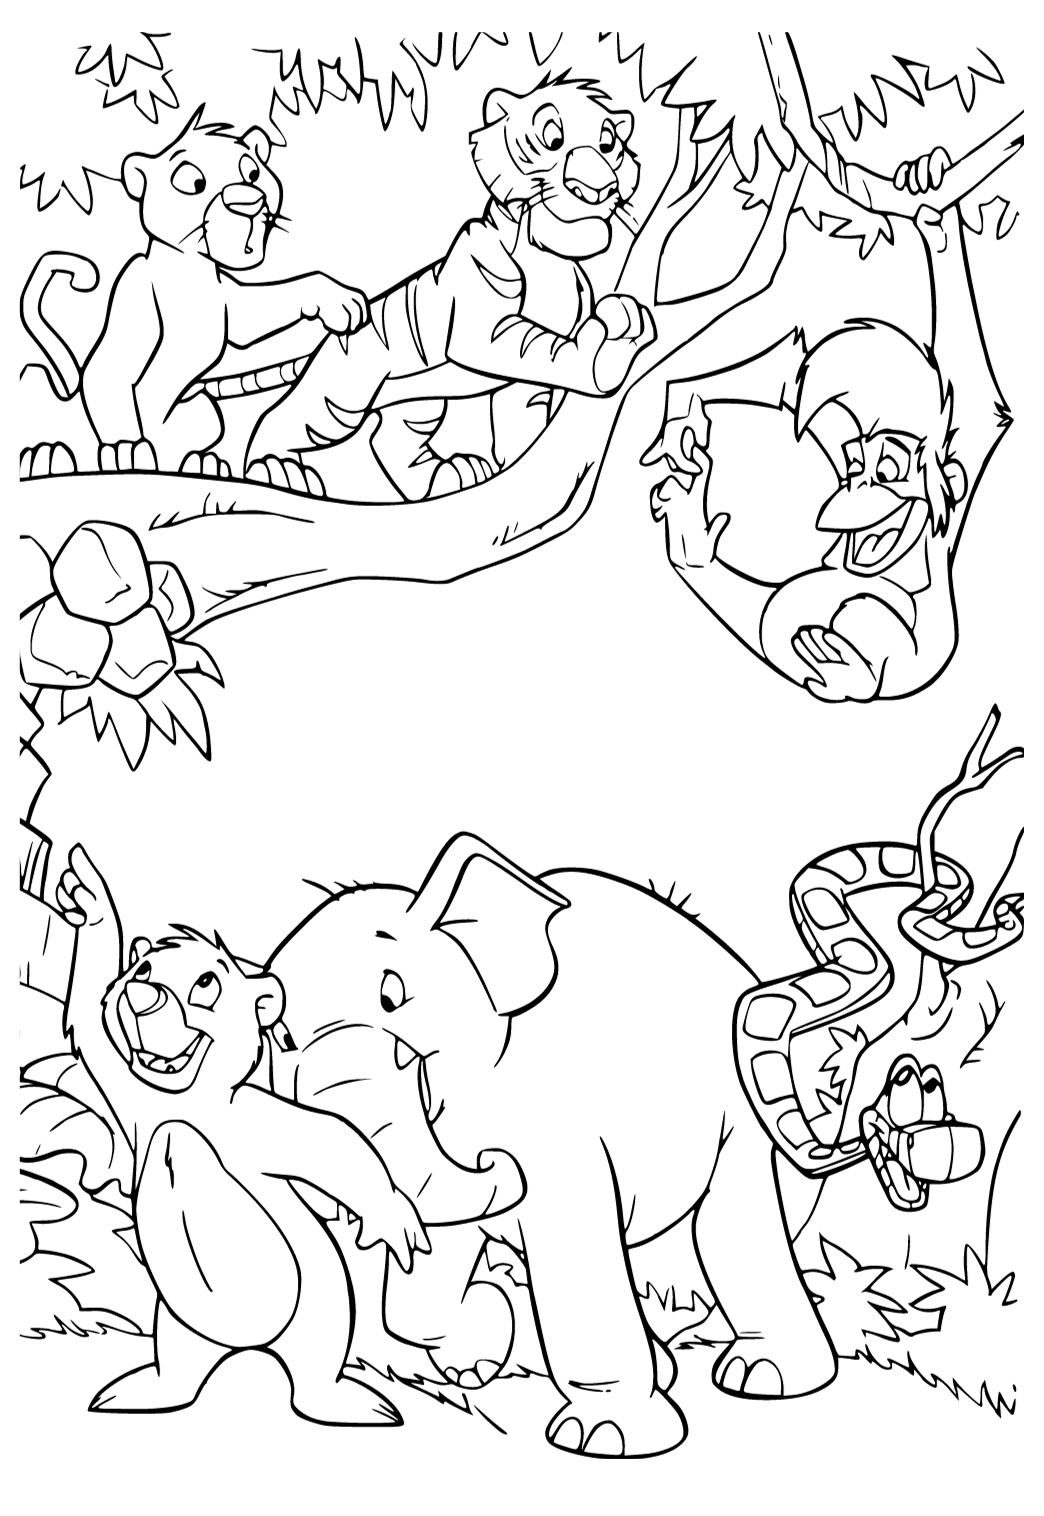 Free printable jungle book characters coloring page for adults and kids